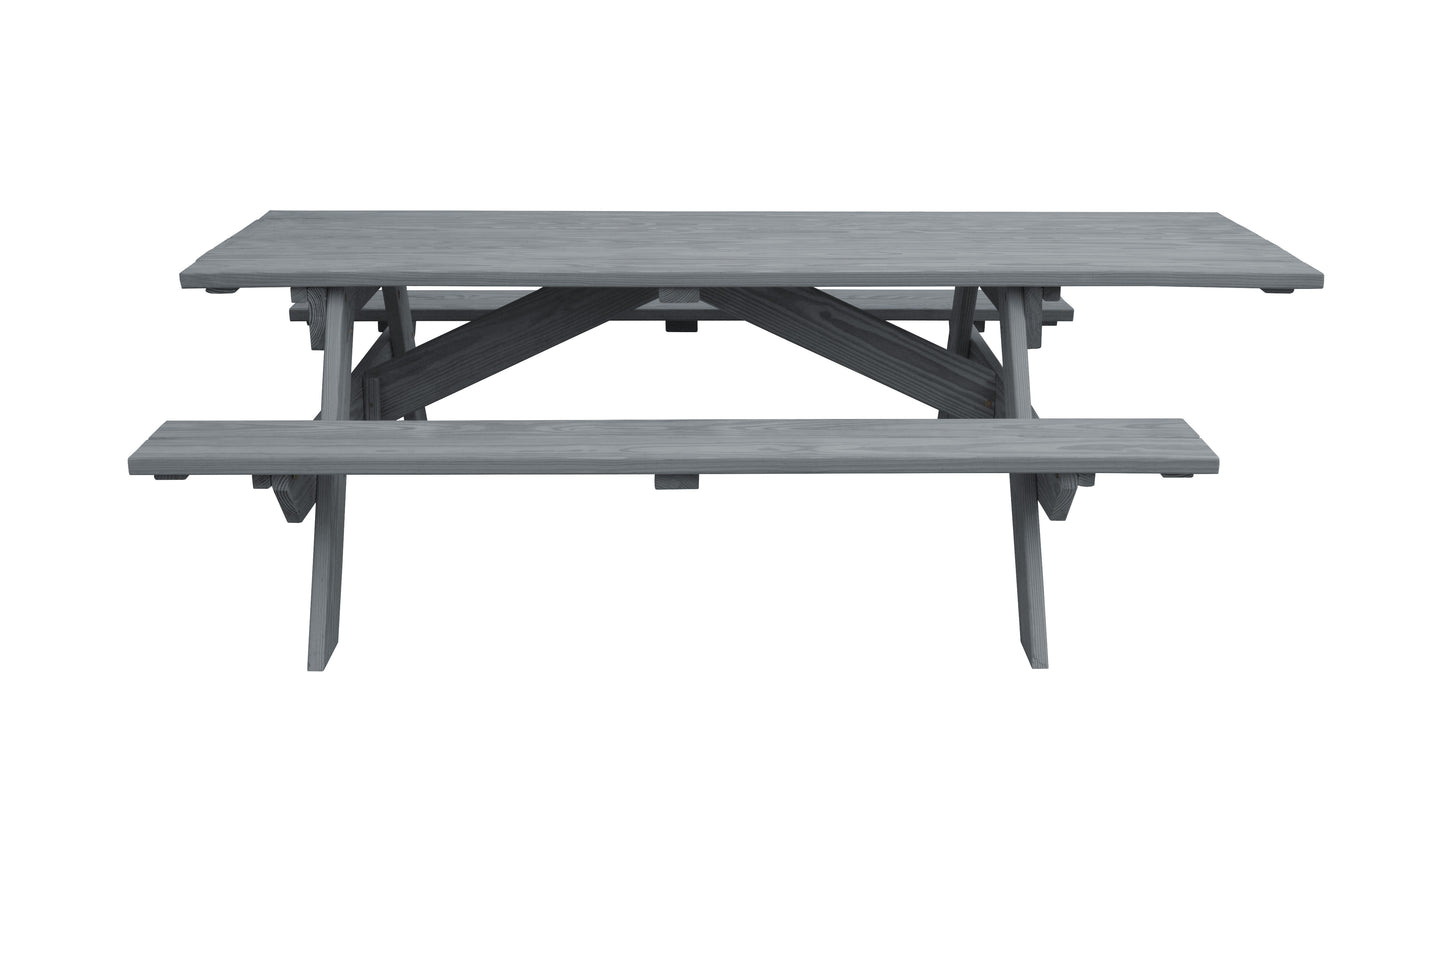 A&L Furniture Co. Heavy Duty ADA Compliant Commercial Pressure Treated Pine Park Picnic Table  - LEAD TIME TO SHIP 10 BUSINESS DAYS